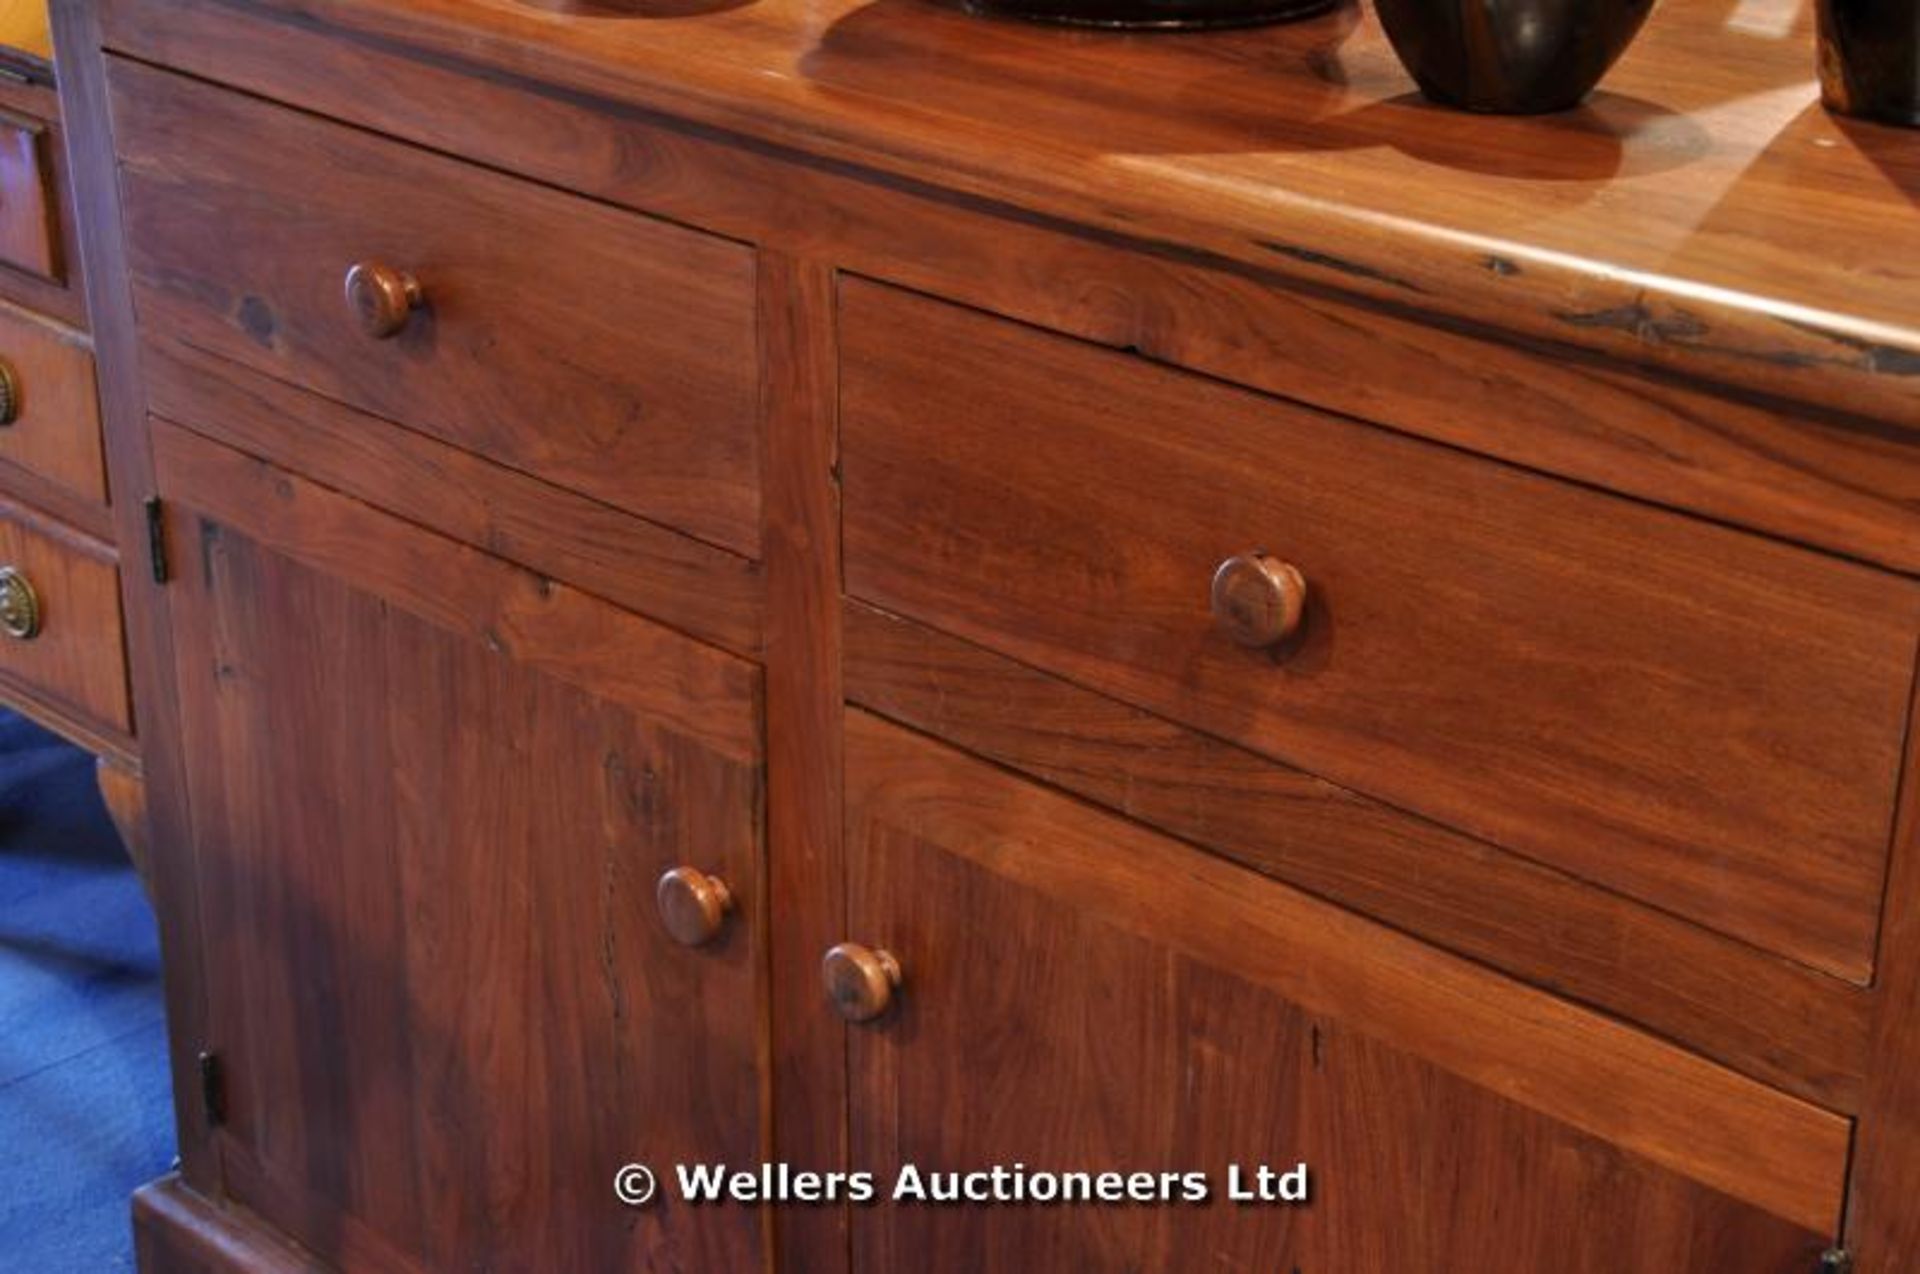 An African Teak sideboard, two drawers over a twin door cupboard - Image 2 of 4